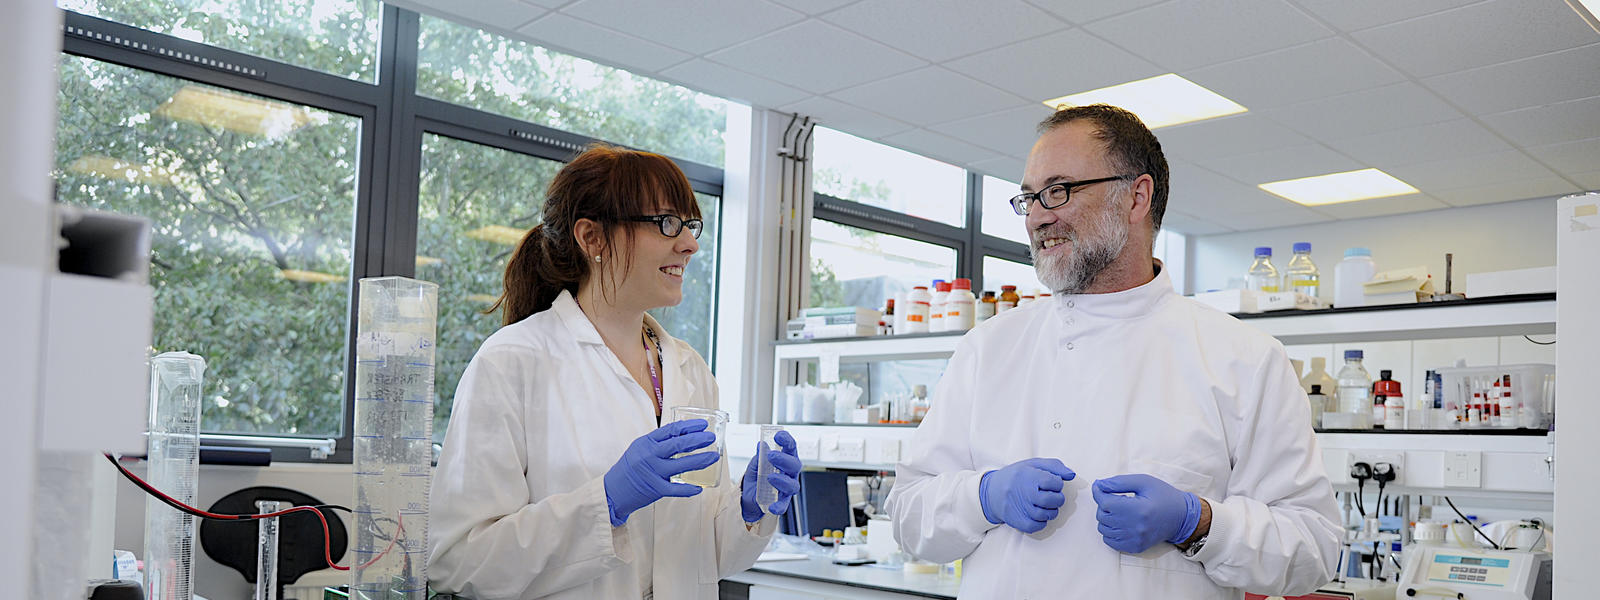 A student and supervisor coordinating together in a new laboratory.